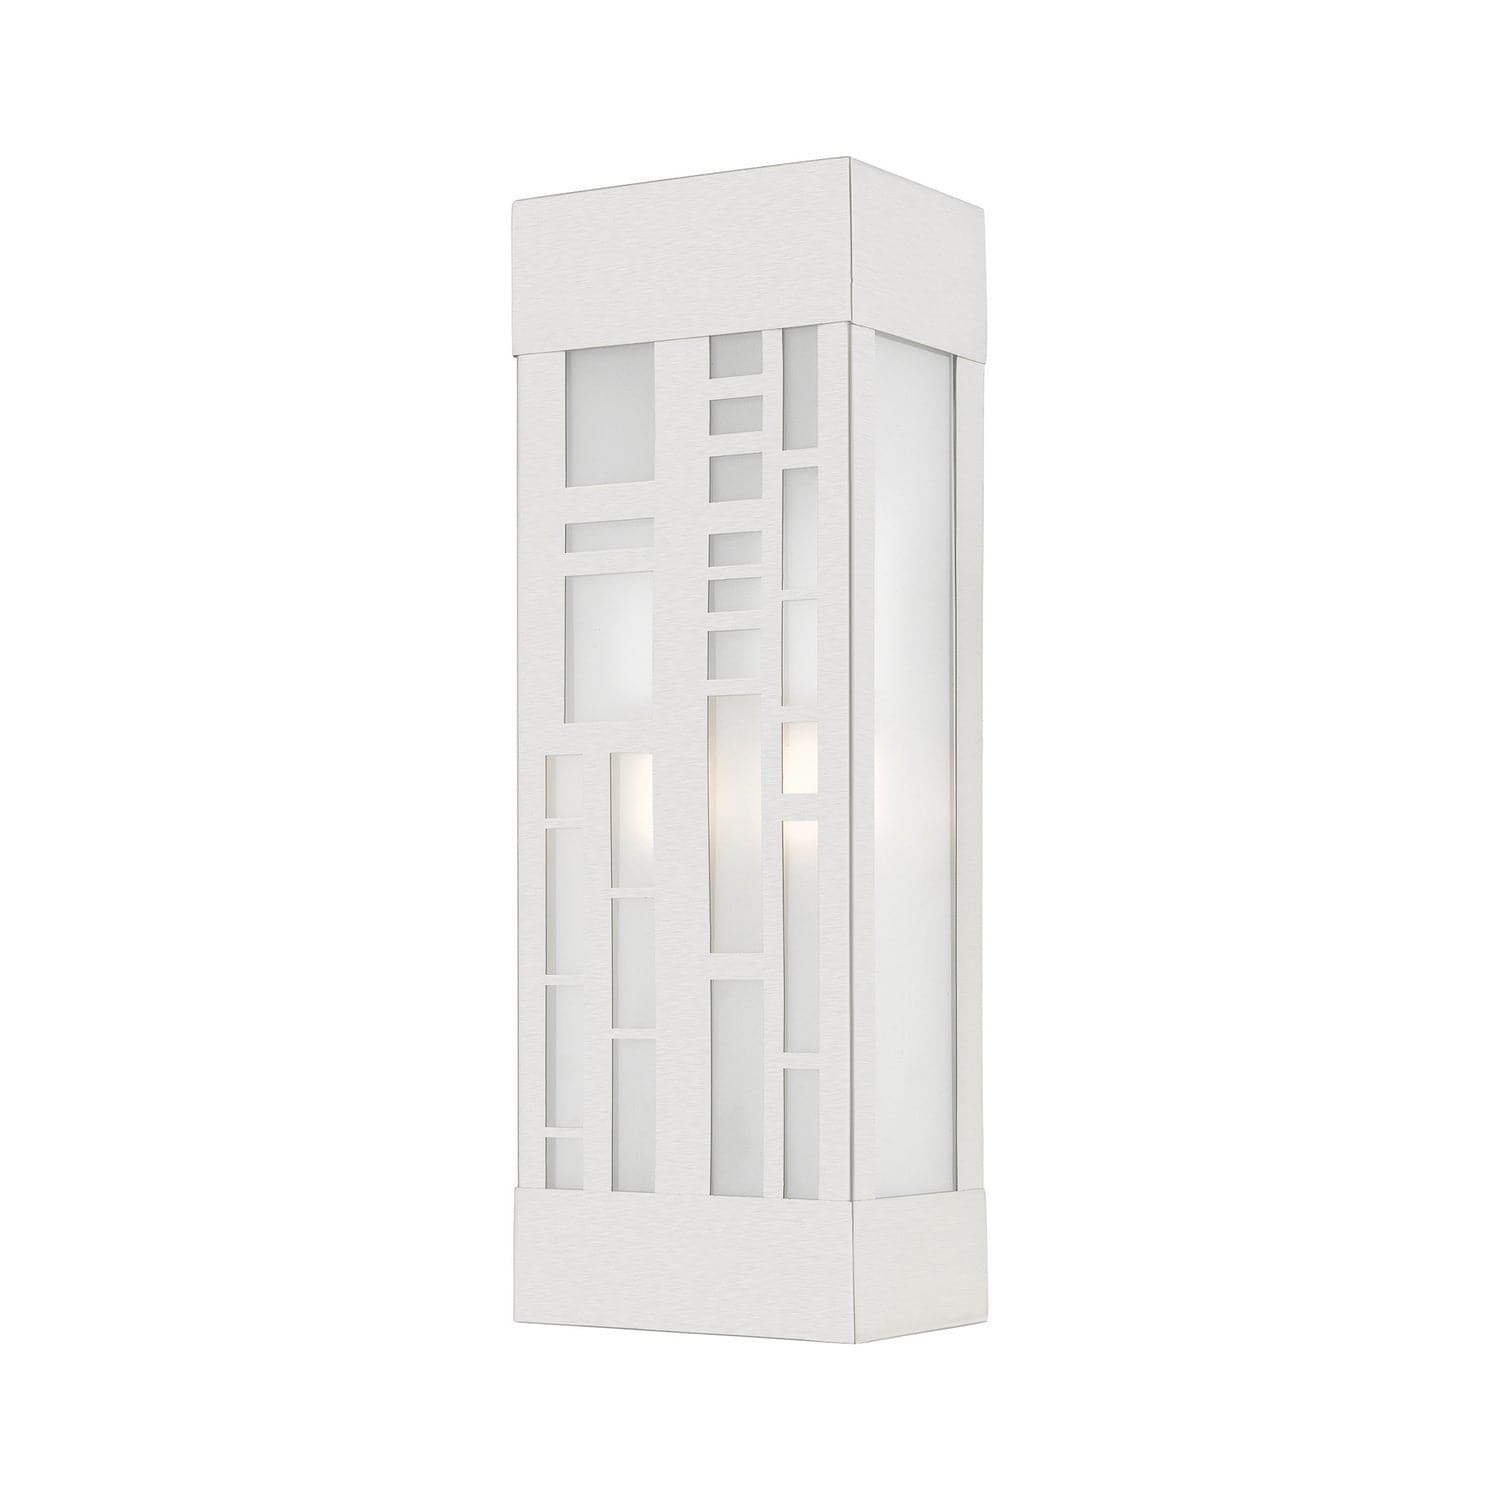 Livex Lighting - 22972-91 - Two Light Outdoor Wall Sconce - Malmo - Brushed Nickel